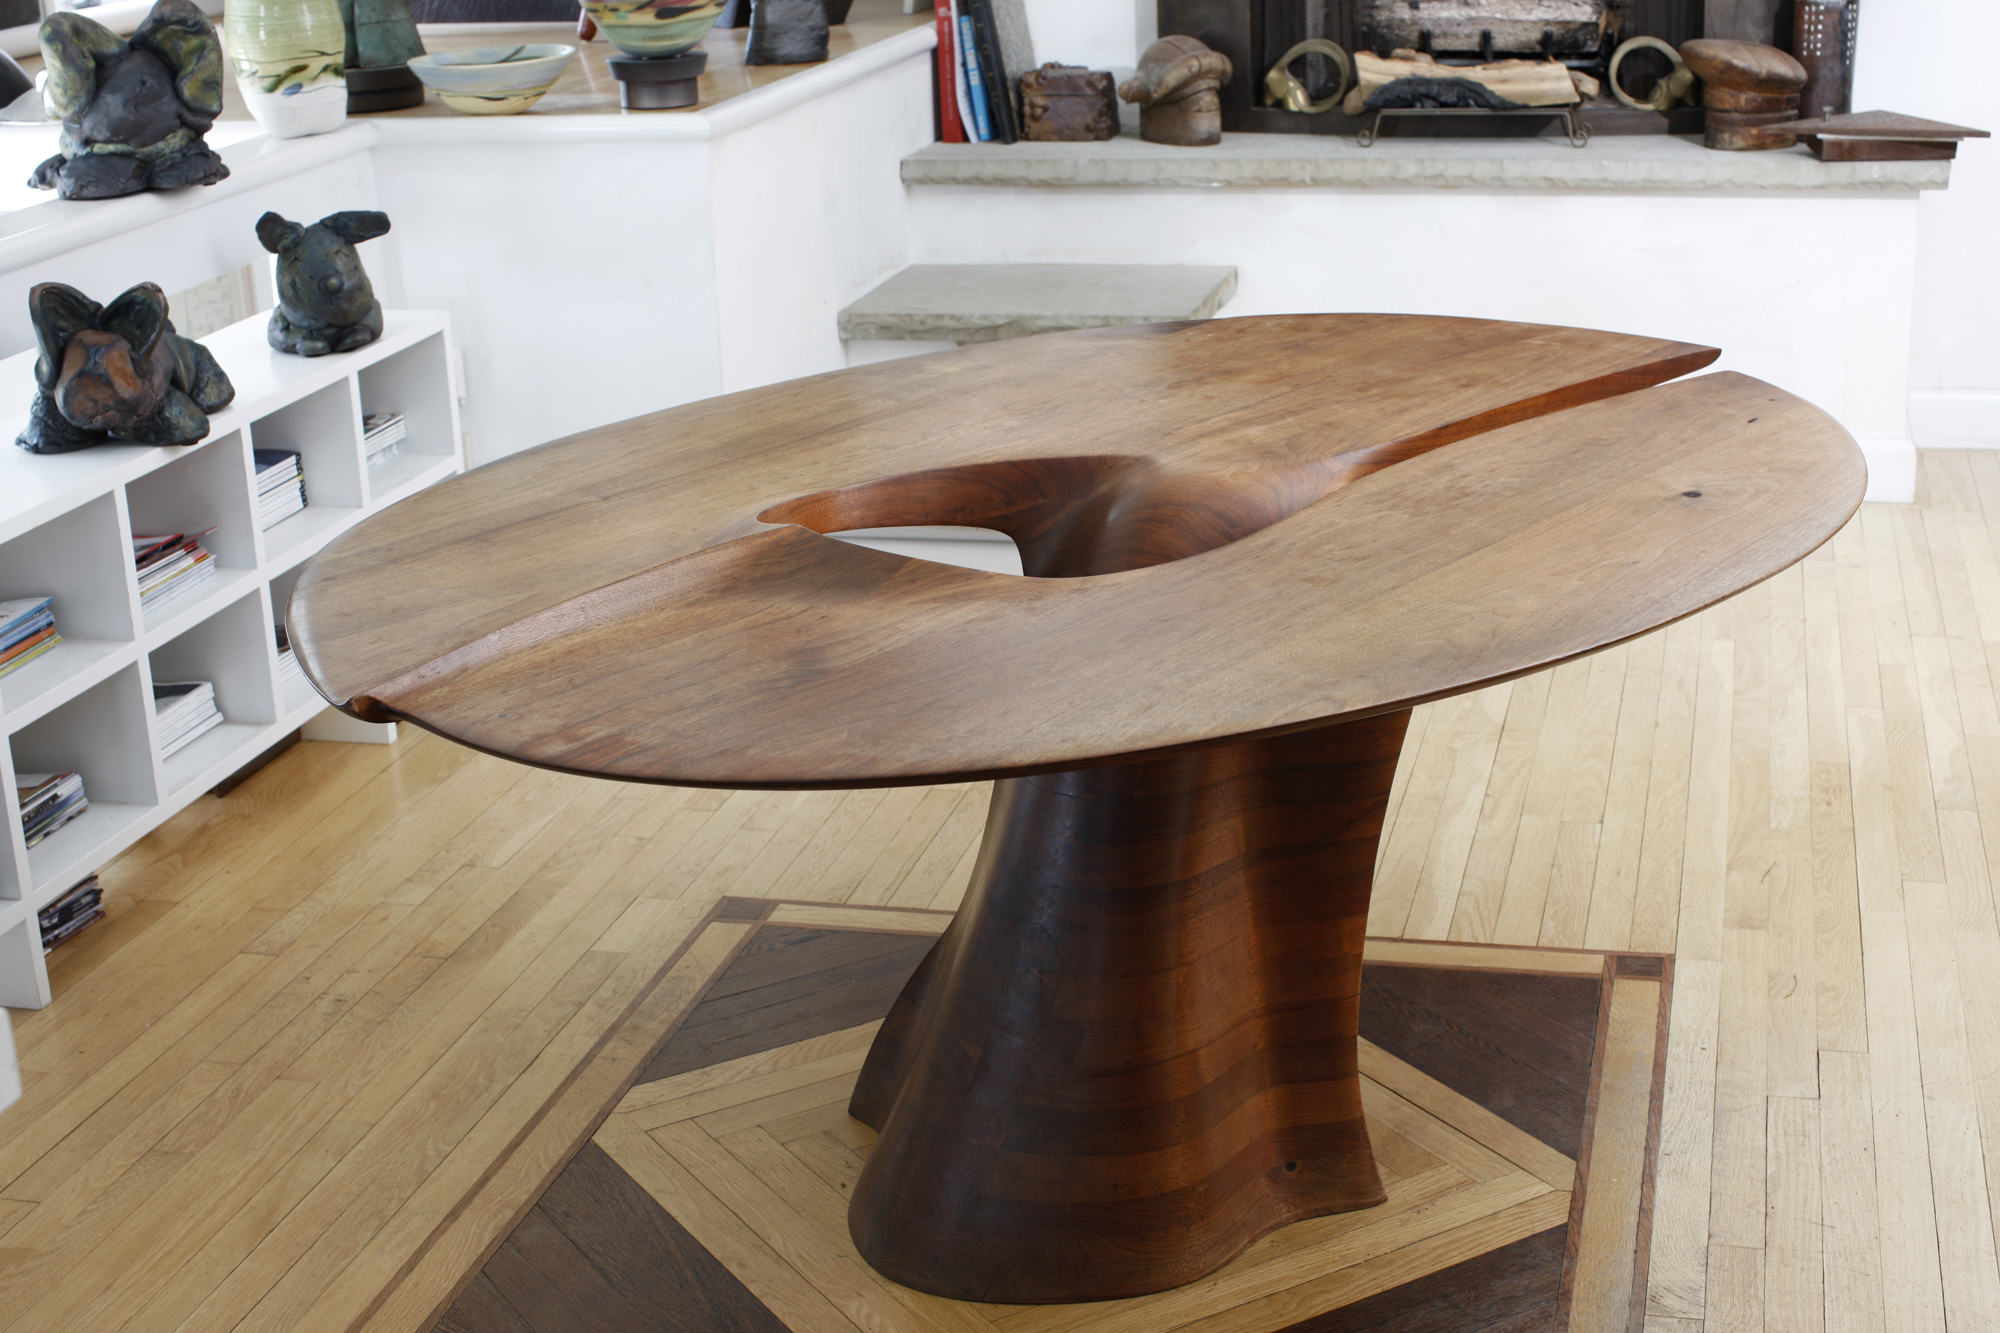 ‘Dining table,’ 1966, by Wendell Castle, walnut, 30 x 58 x 73 inches. Courtesy of Wendell Castle and Nancy Jurs. Photo courtesy of Friedman Benda and the artist. Photo by Matt Wittmeyer